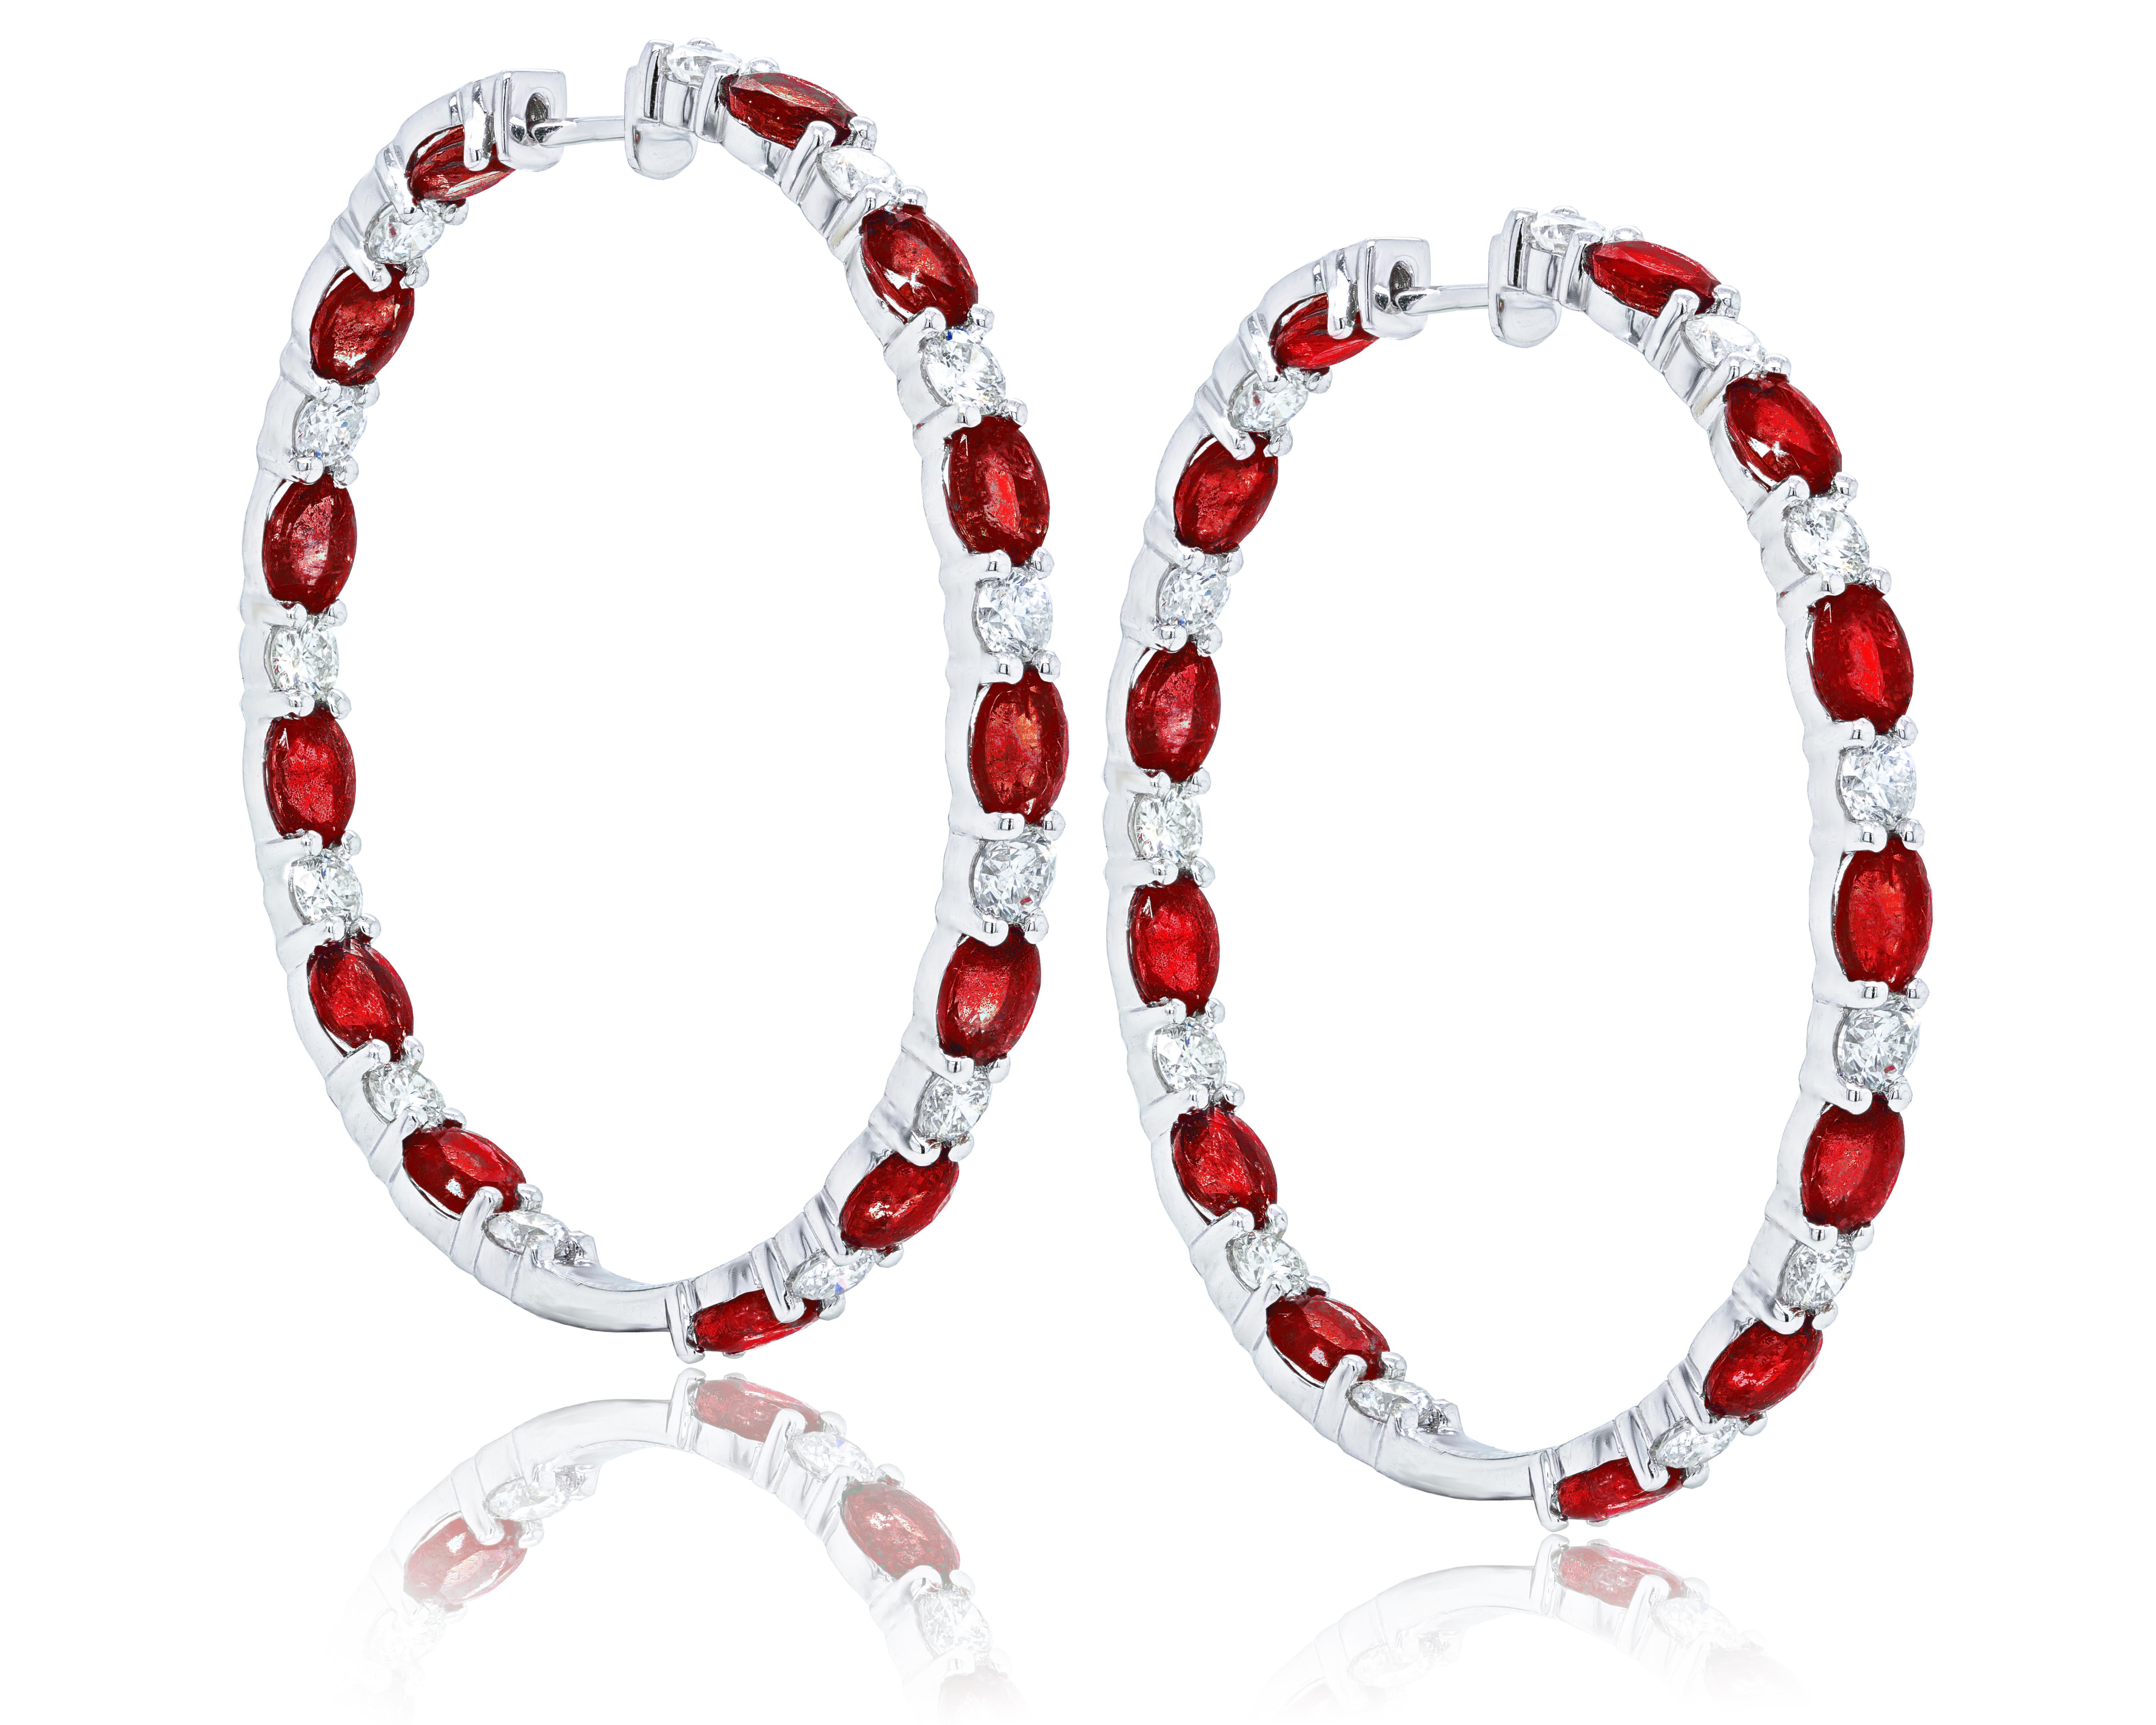 18 Karat White gold Ruby and Diamond Hoop Earrings features 10.66 Carats of Rubies and 3.16 Carats of Diamonds. 